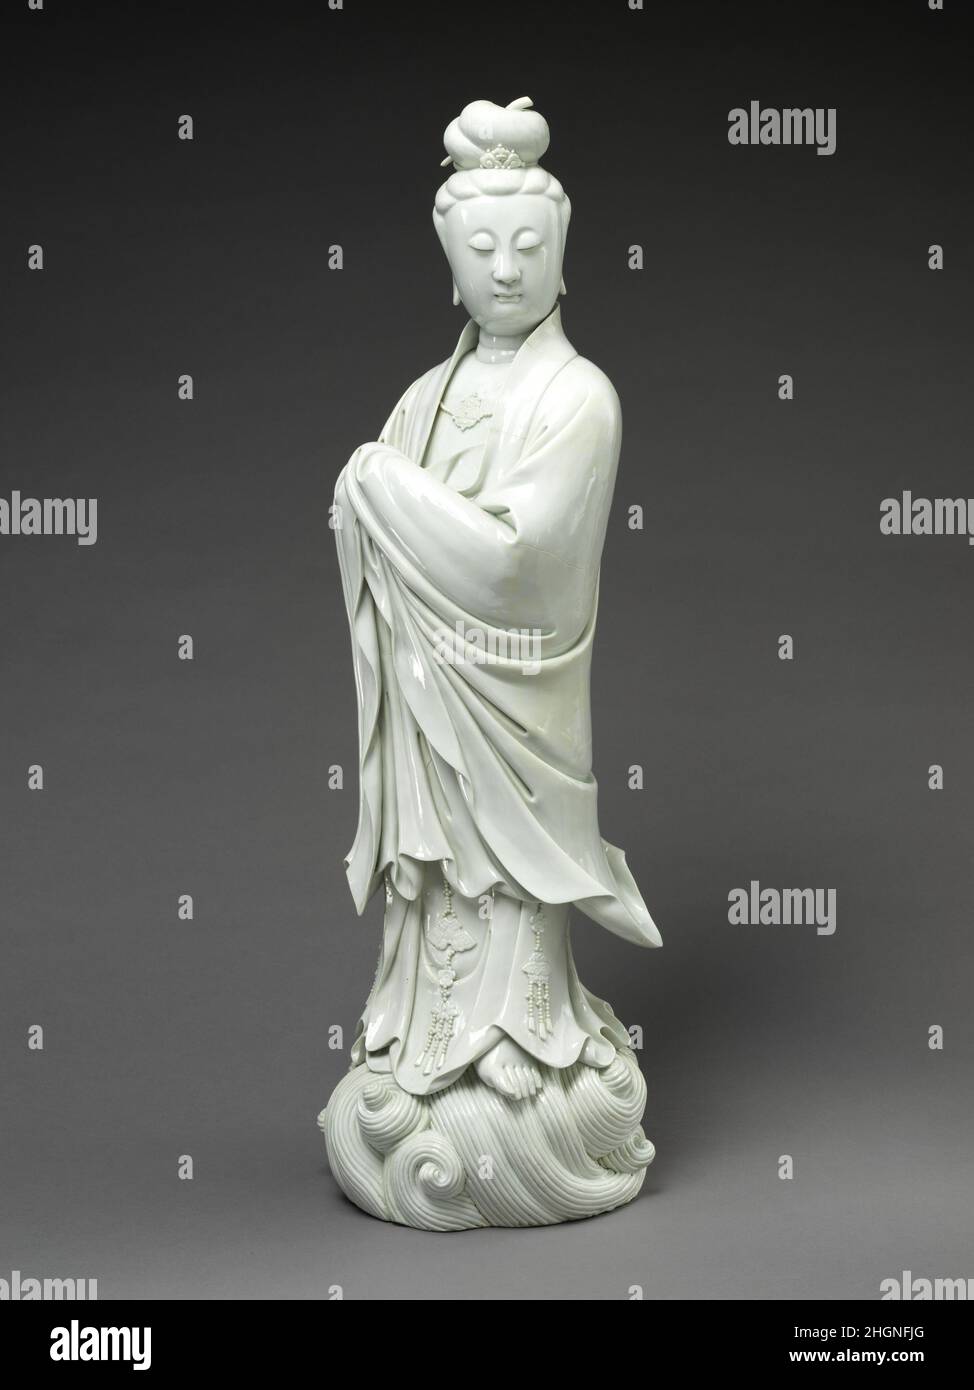 White-Robed Guanyin 18th century China The ivory white porcelain of the Dehua kilns of Fujian was well-suited to representing Guanyin, especially in her white?robed form, and the kiln produced countless sculptures of the bodhisattva to meet the public’s insatiable demand. This is a particularly grand example, befitting a wealthy residence.. White-Robed Guanyin. China. 18th century. Porcelain with white glaze (Dehua ware). Qing dynasty (1644–1911). Ceramics Stock Photo